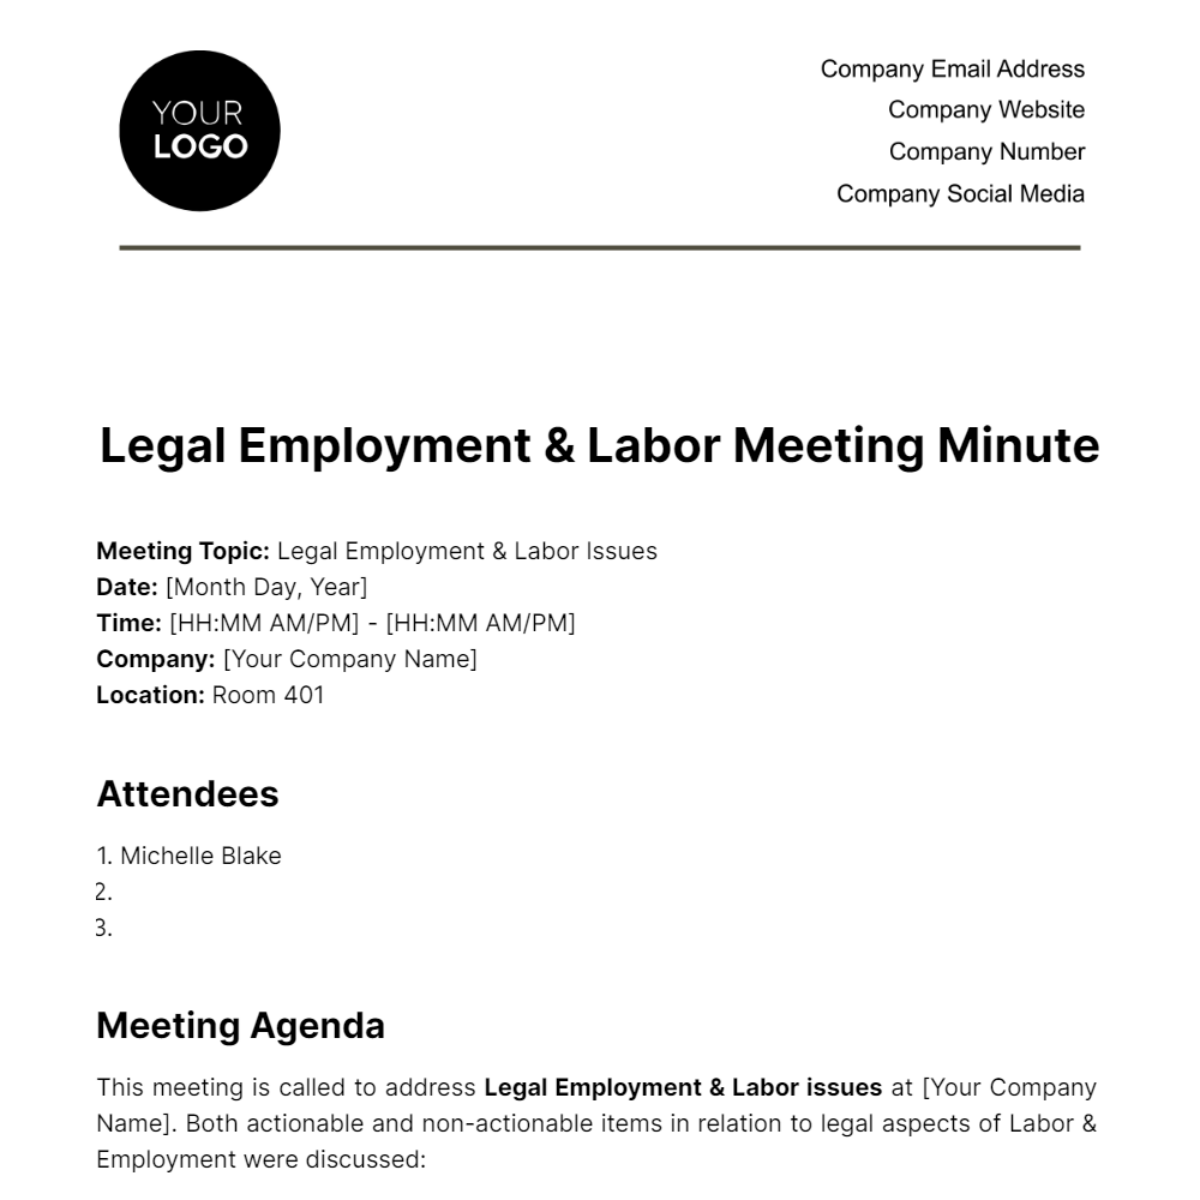 Legal Employment & Labor Meeting Minute Template